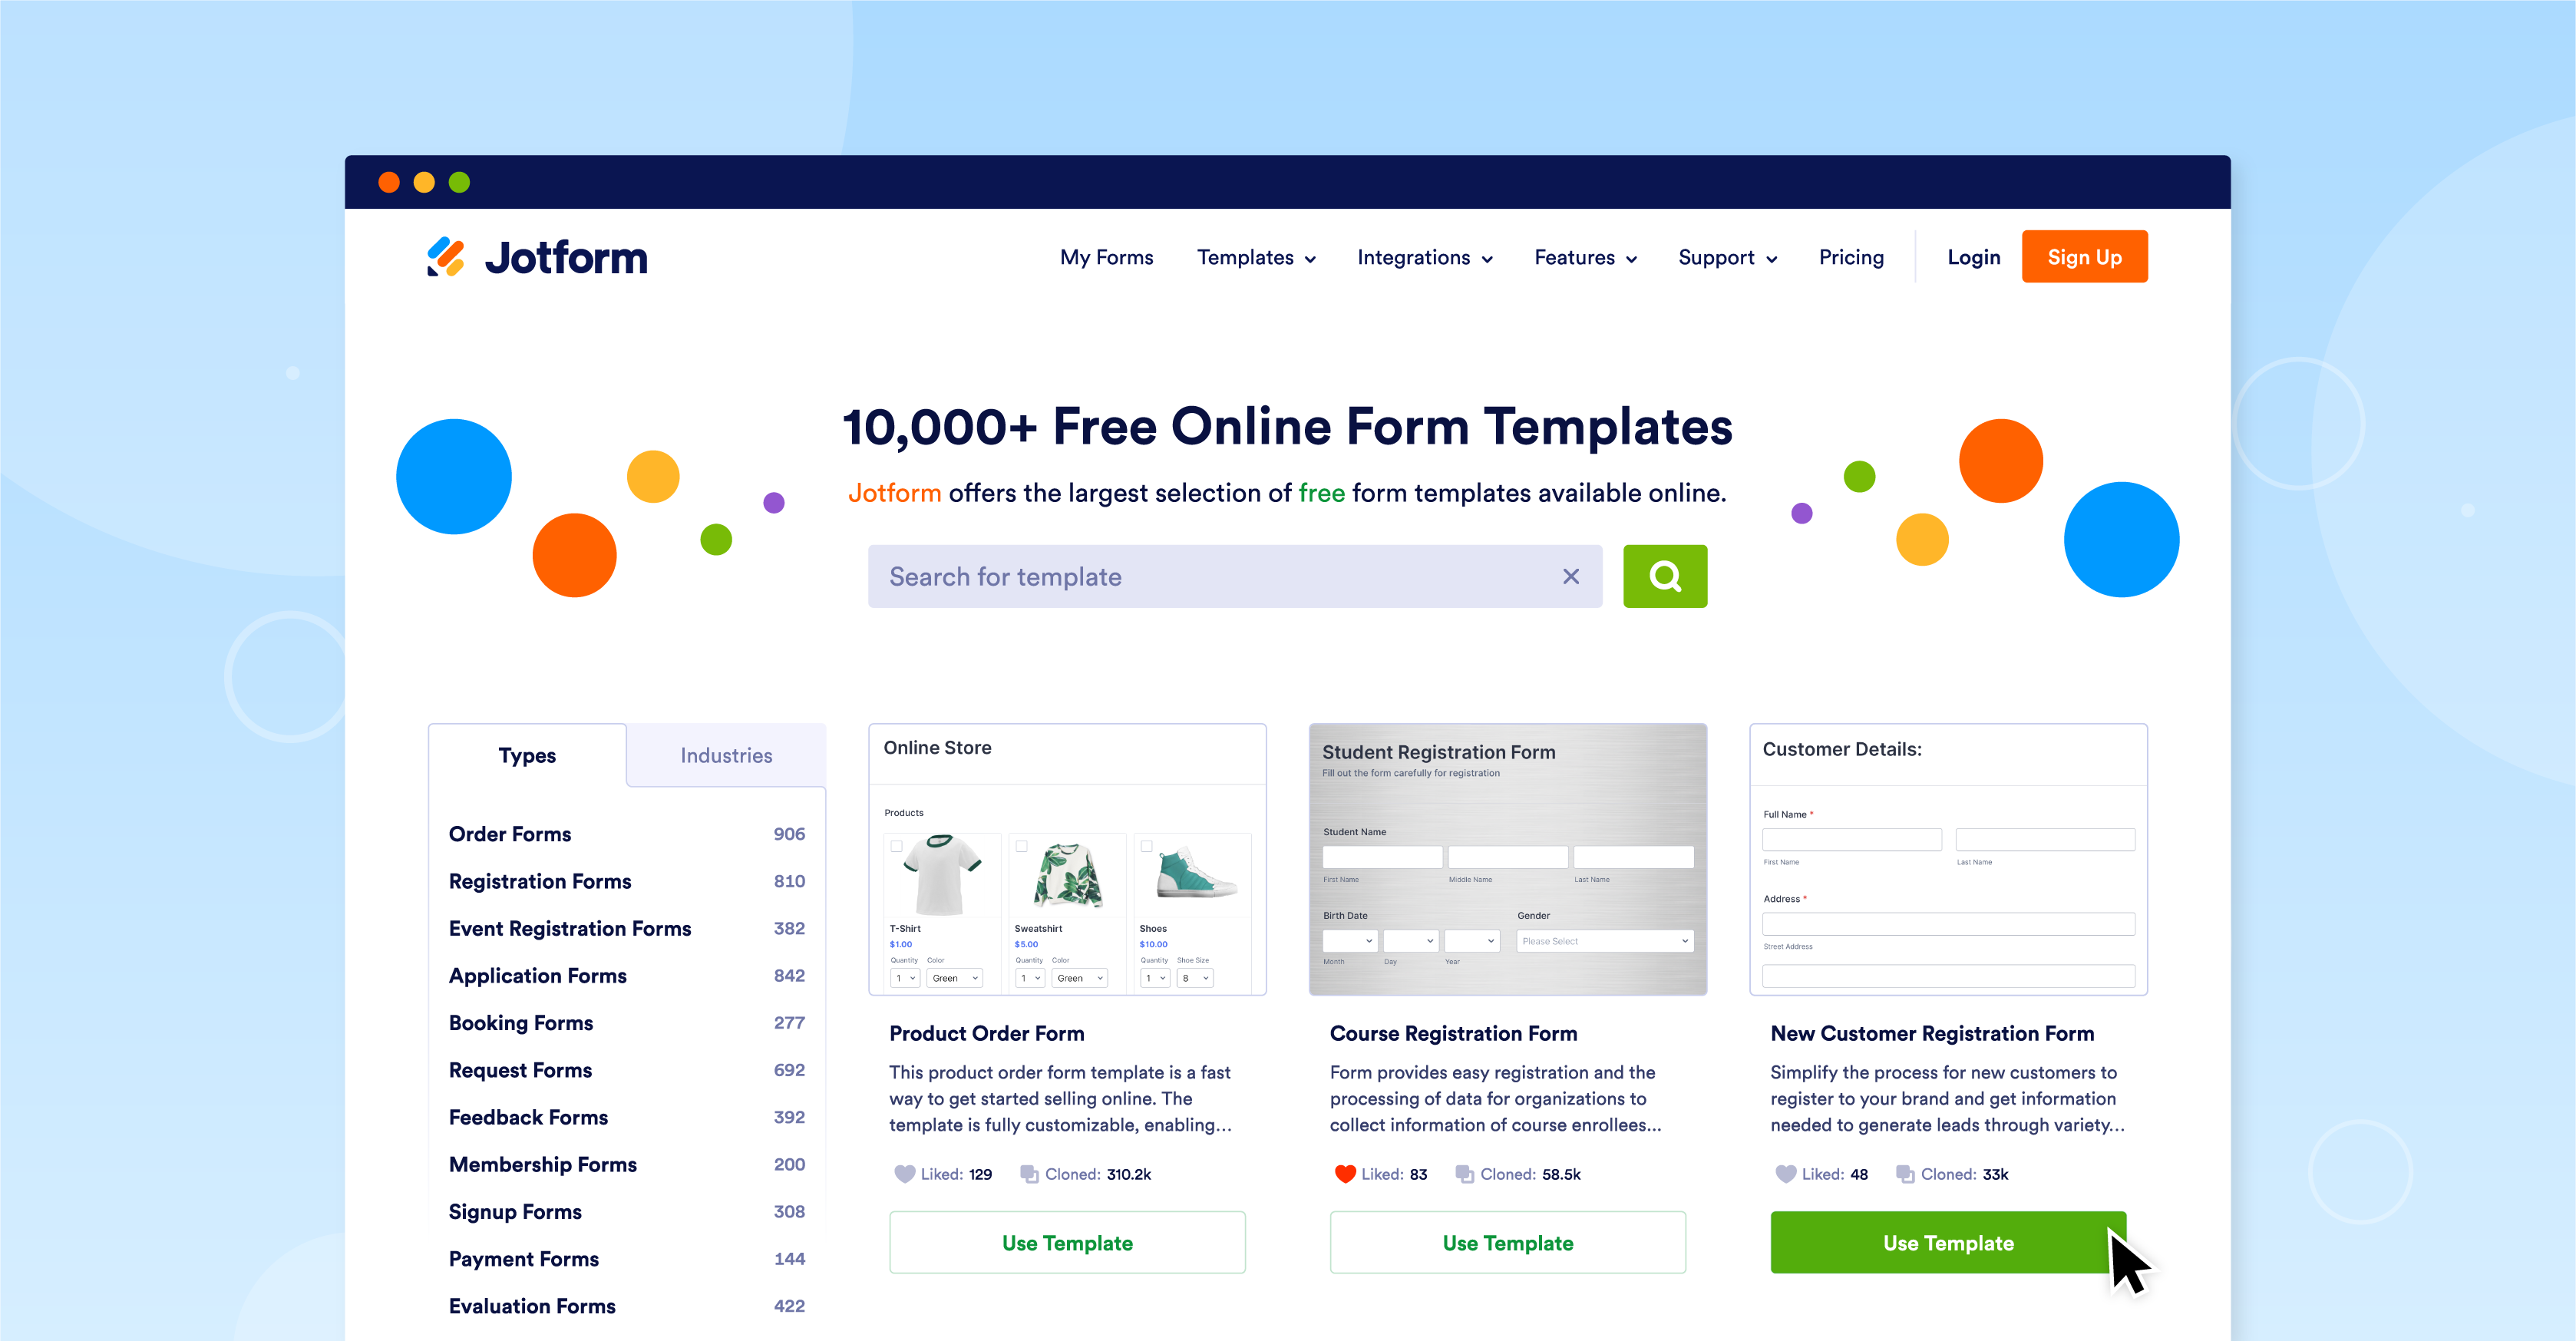 Jotform Software - Jotform offers the largest selection of free form templates available online.